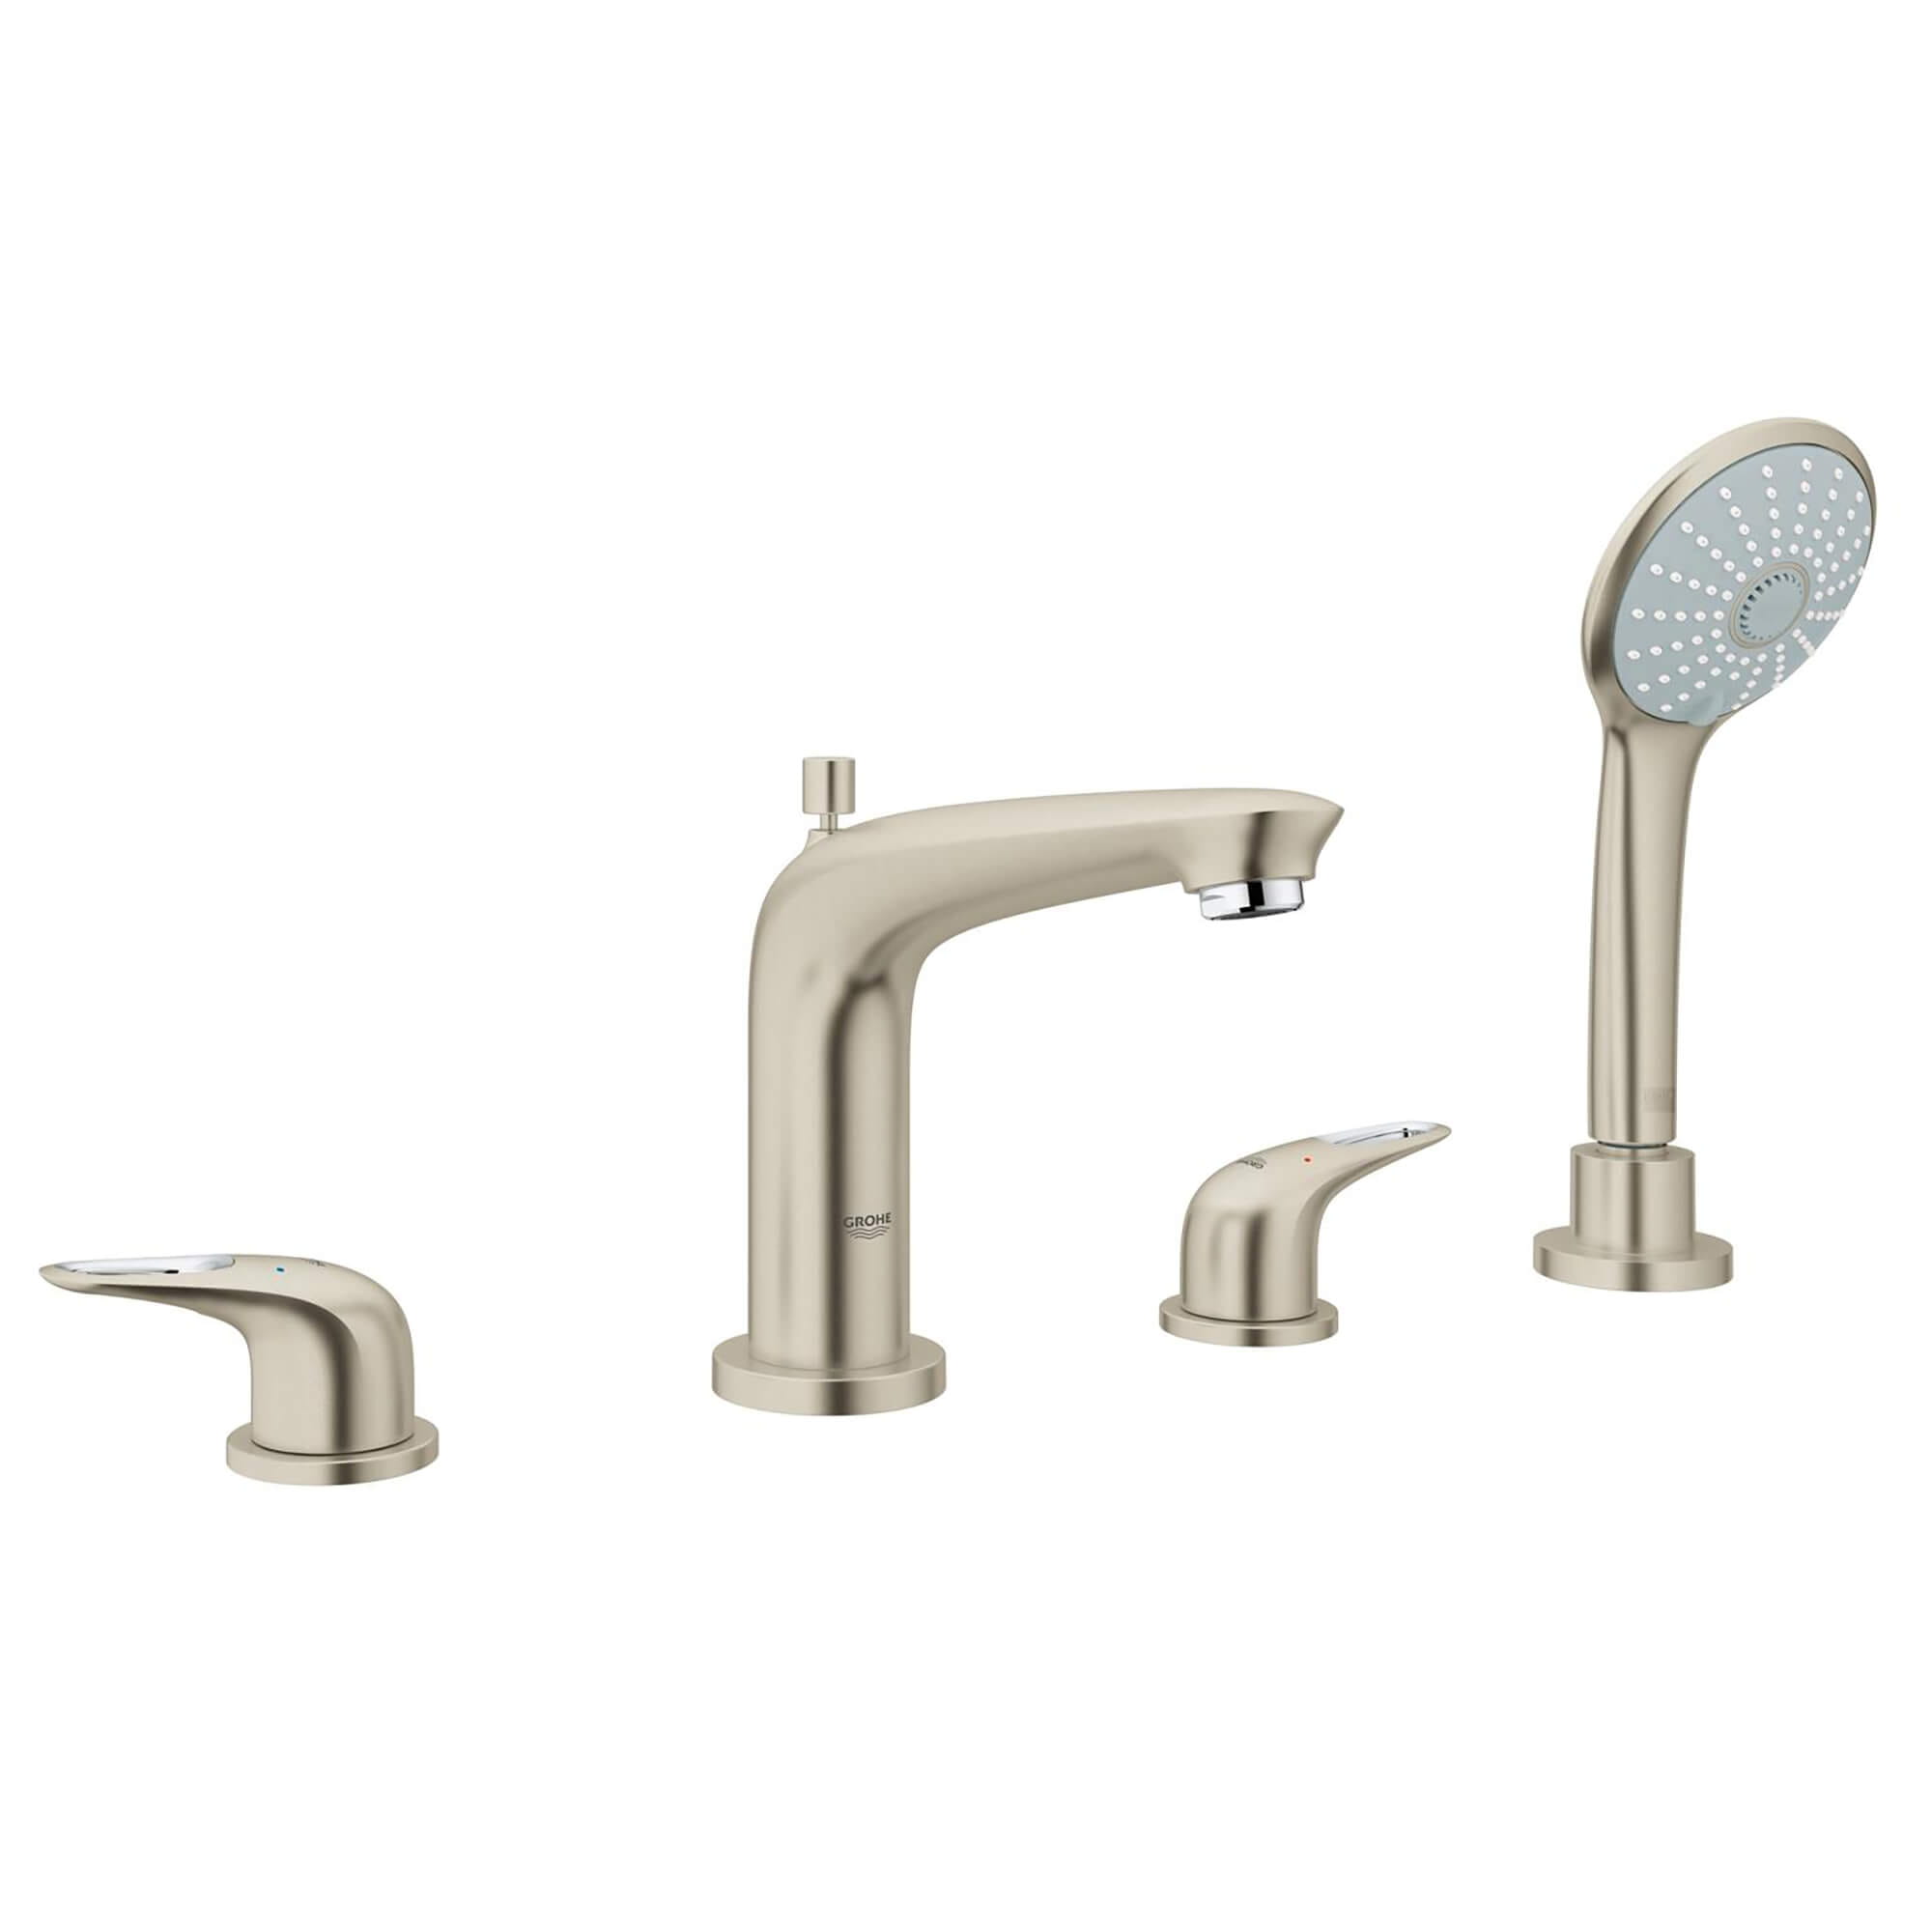 Eurostyle Roman Tub Filler With 25 GPM Personal Hand Shower GROHE BRUSHED NICKEL